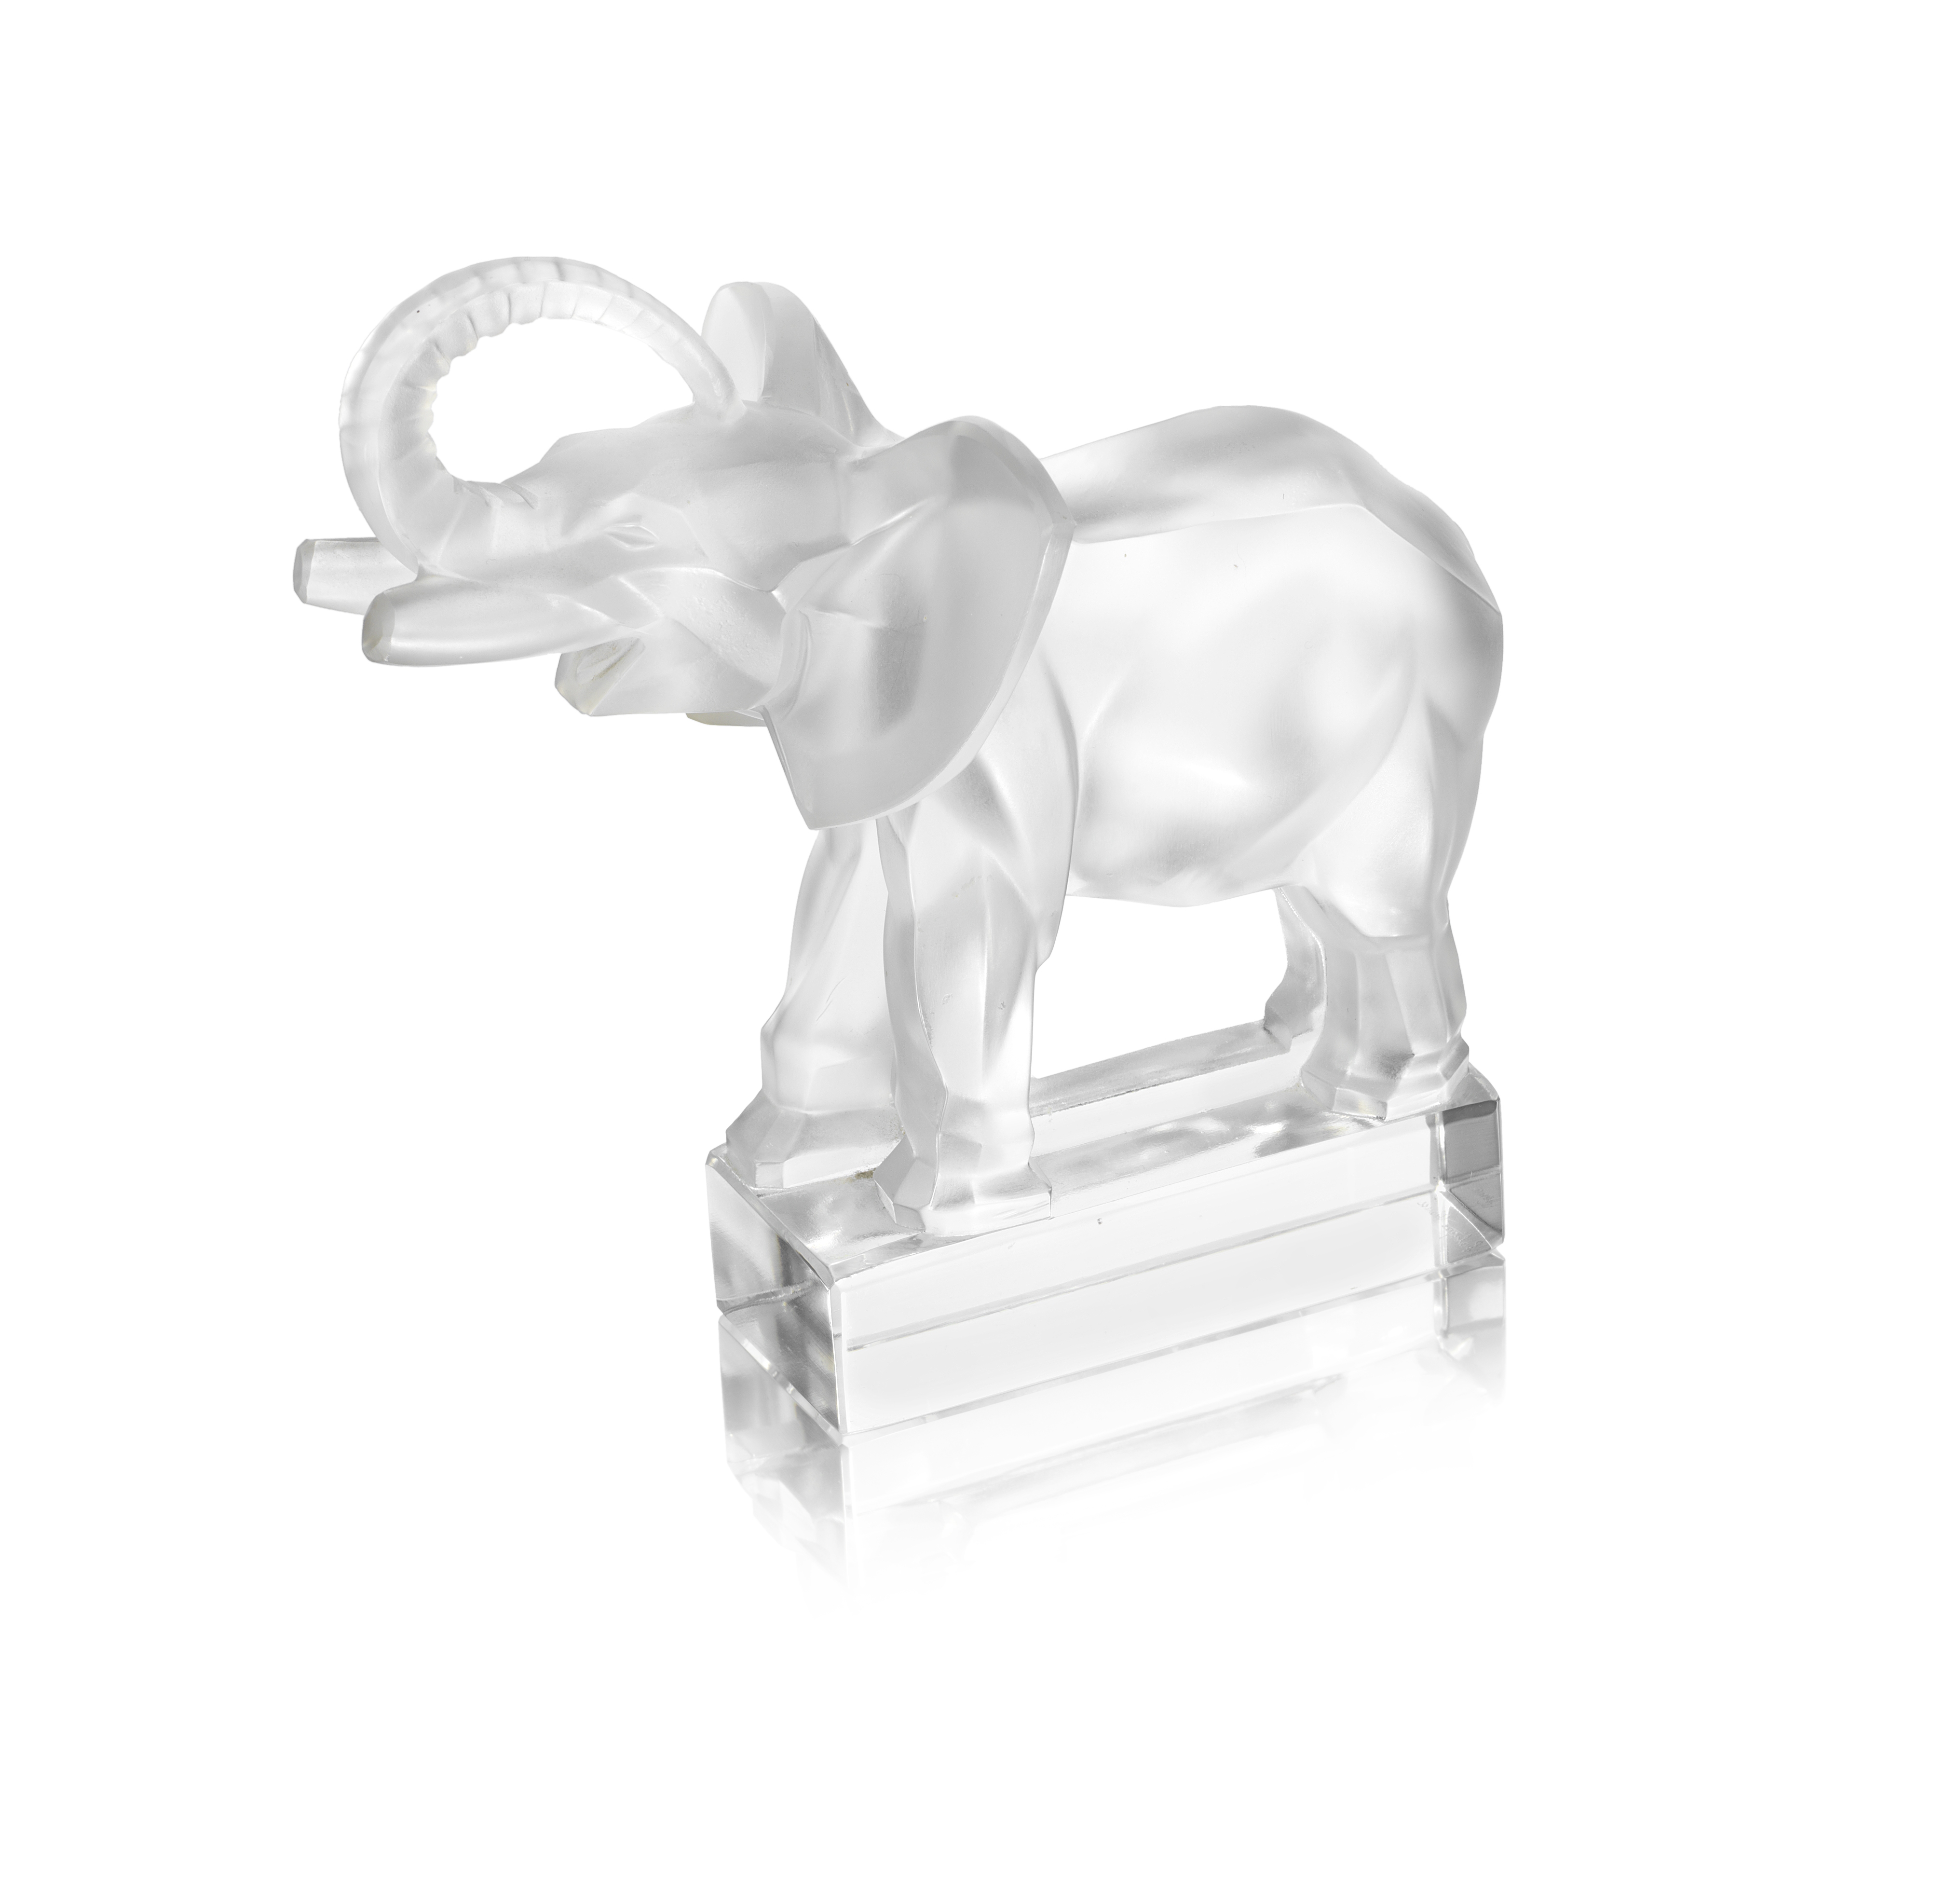 RENÉ LALIQUE (FRENCH, 1860-1945) A Post-War 'Éléphant' Paperweight, design introduced in 1931 - Image 2 of 2